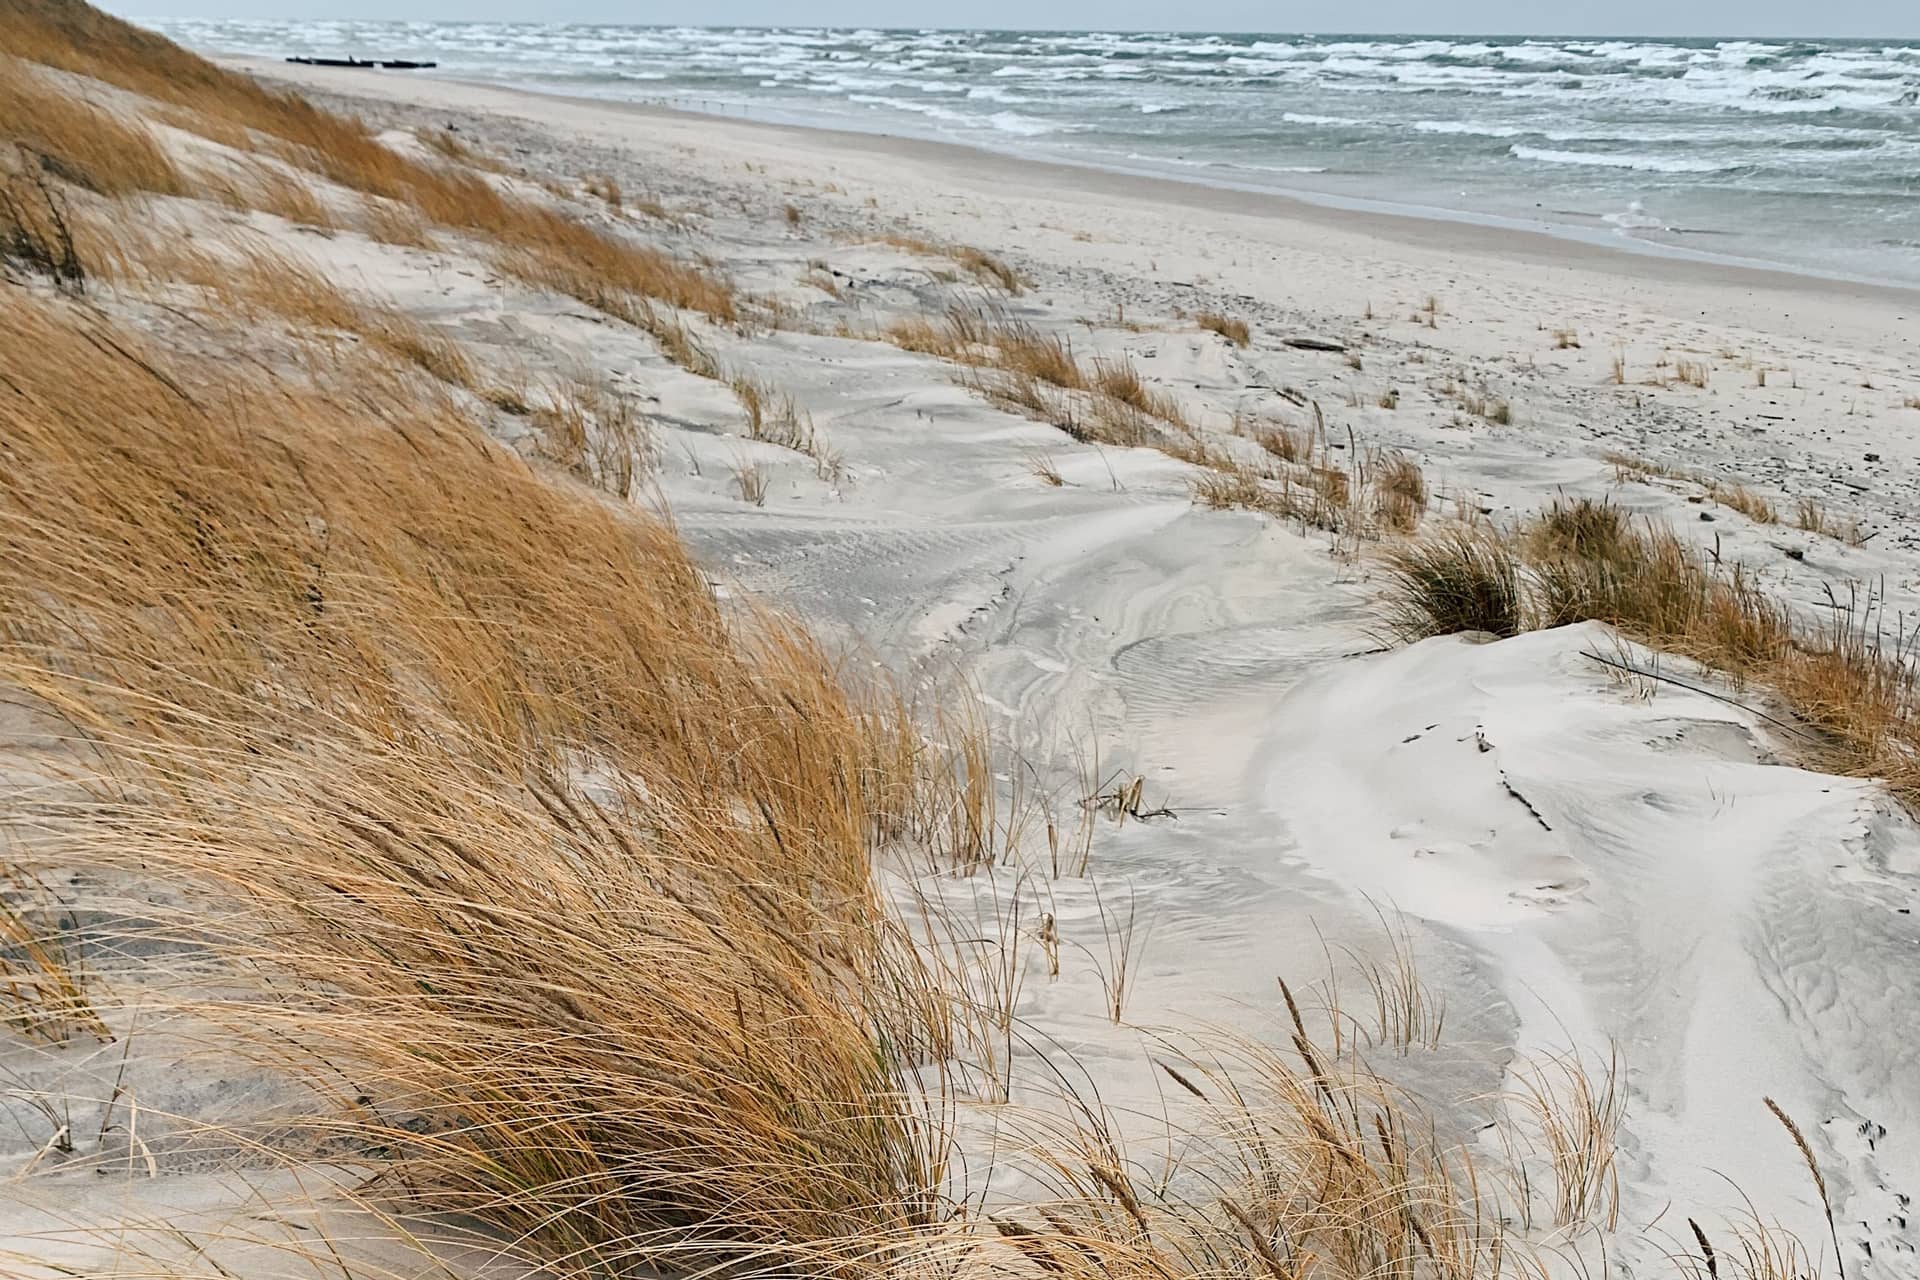 A desert sandy beach of Baltic sea, the sand-dune land with dry grass